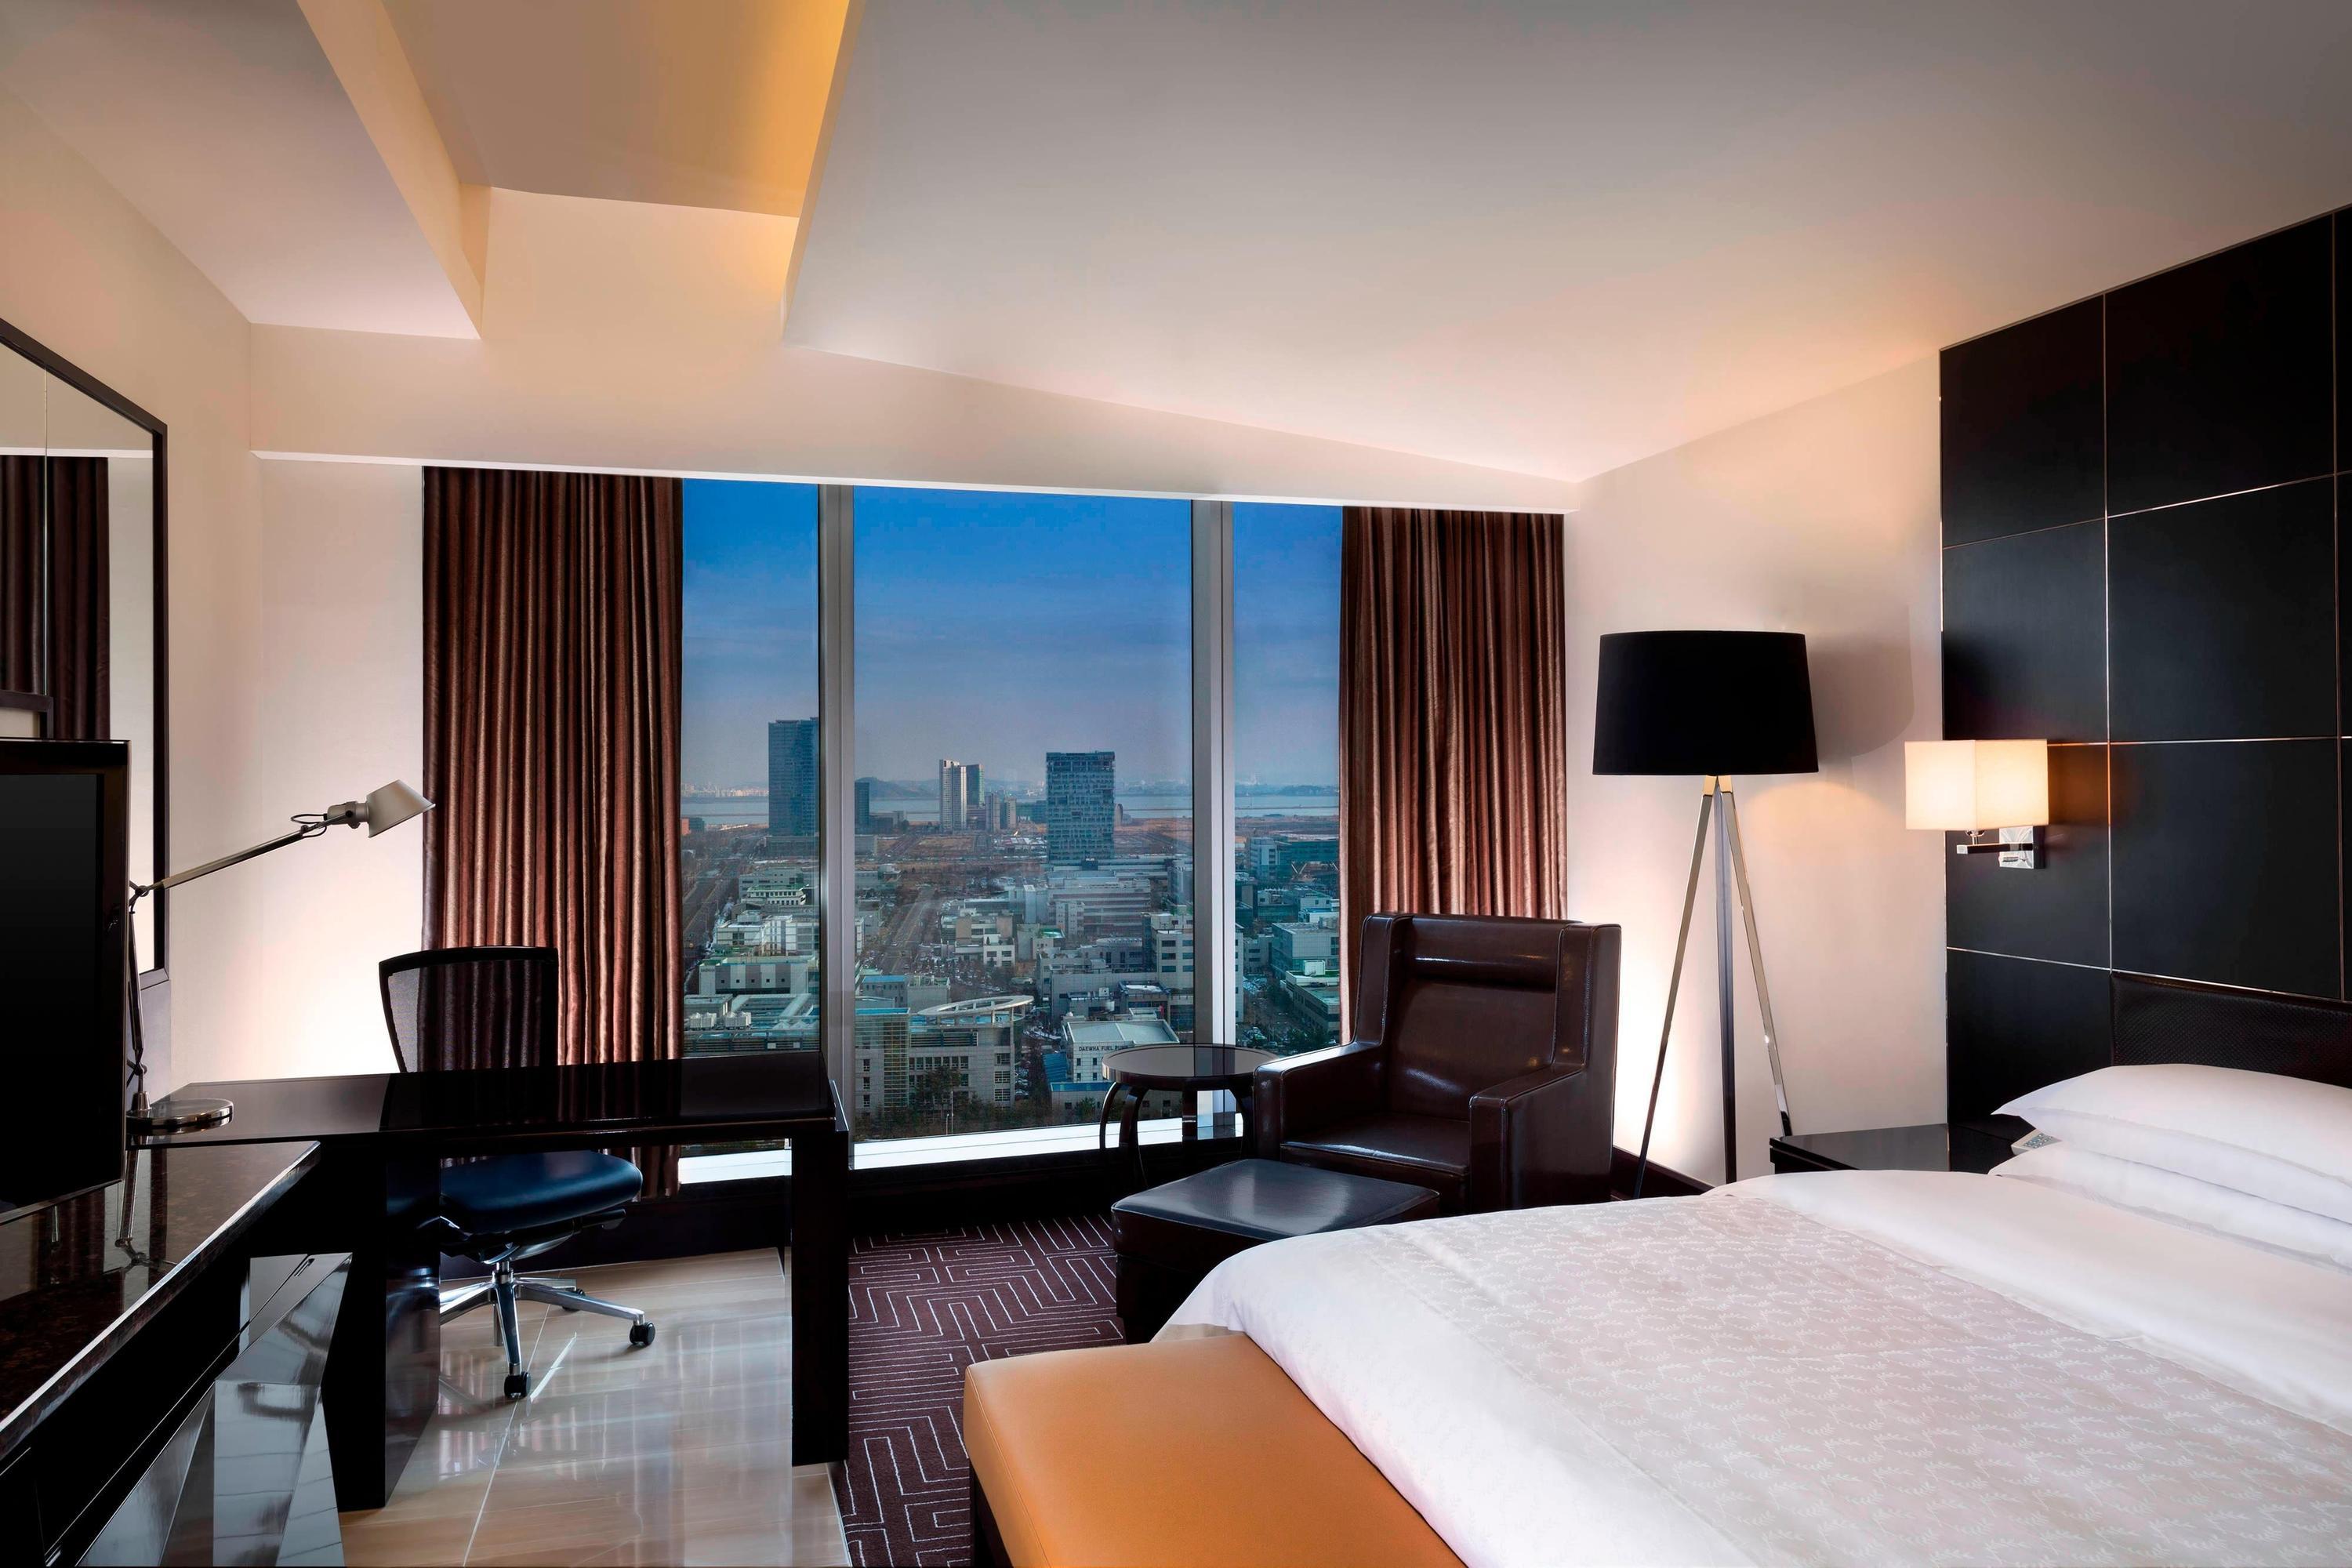 Paradise City from $198. Incheon Hotel Deals & Reviews - KAYAK